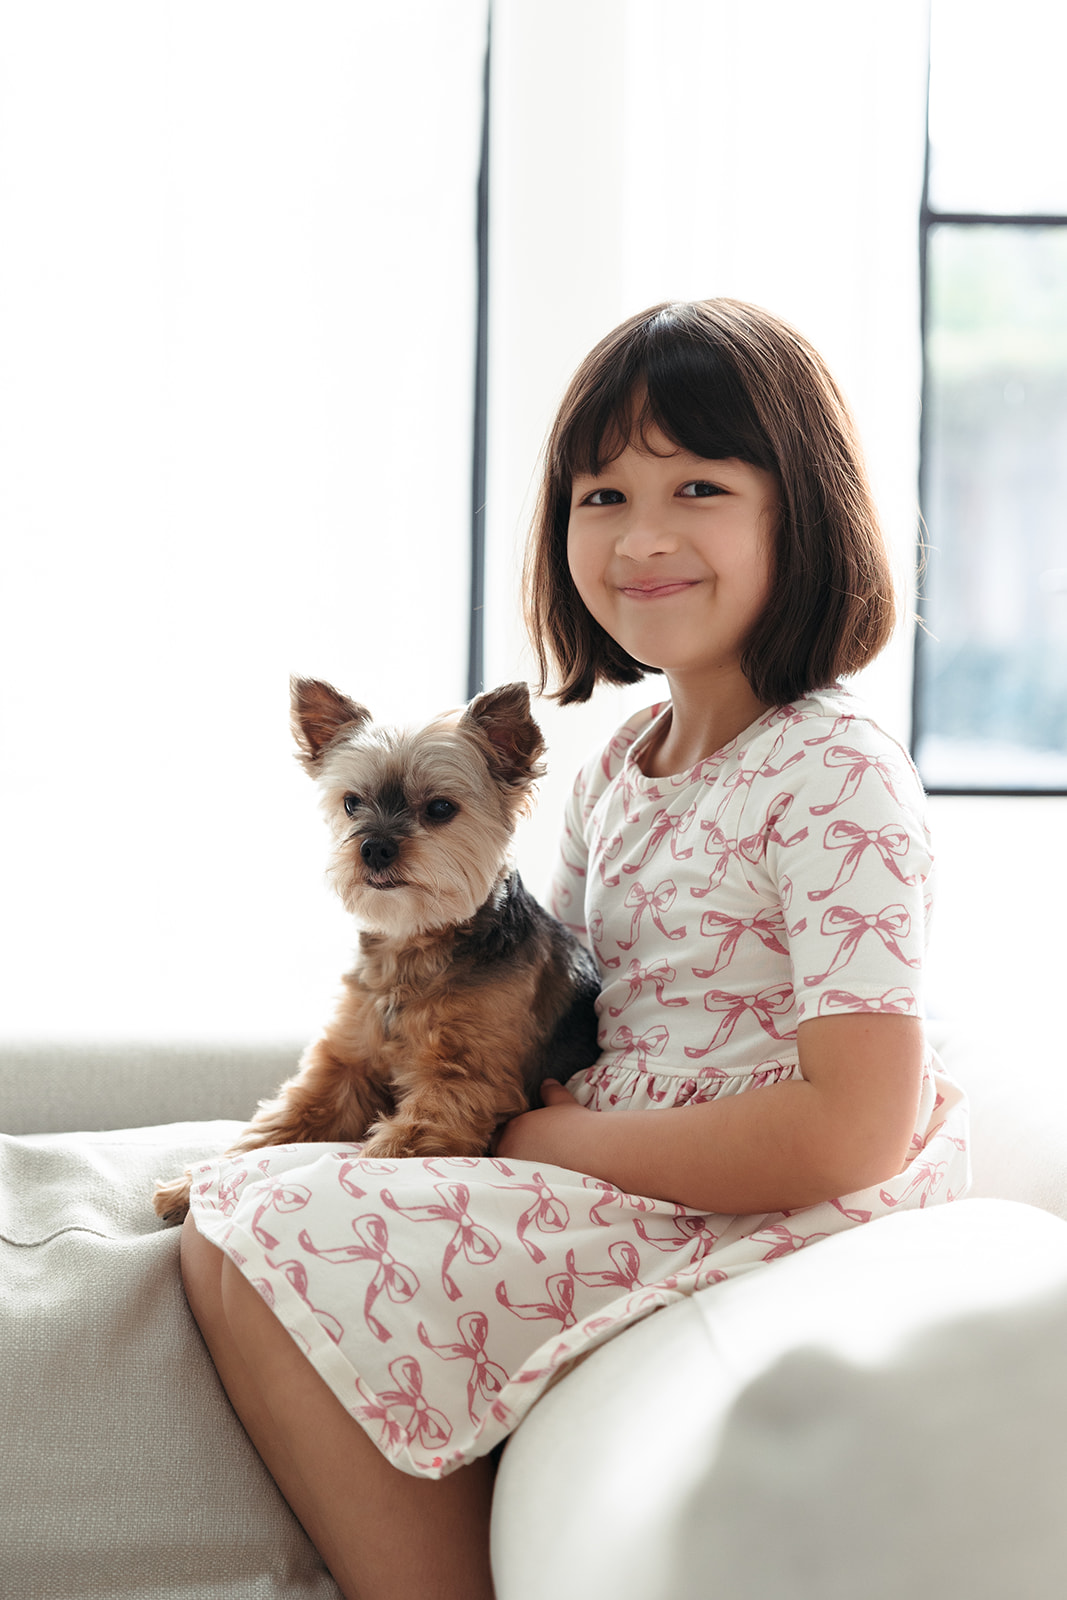 Big sister and her dog during professional photoshoot